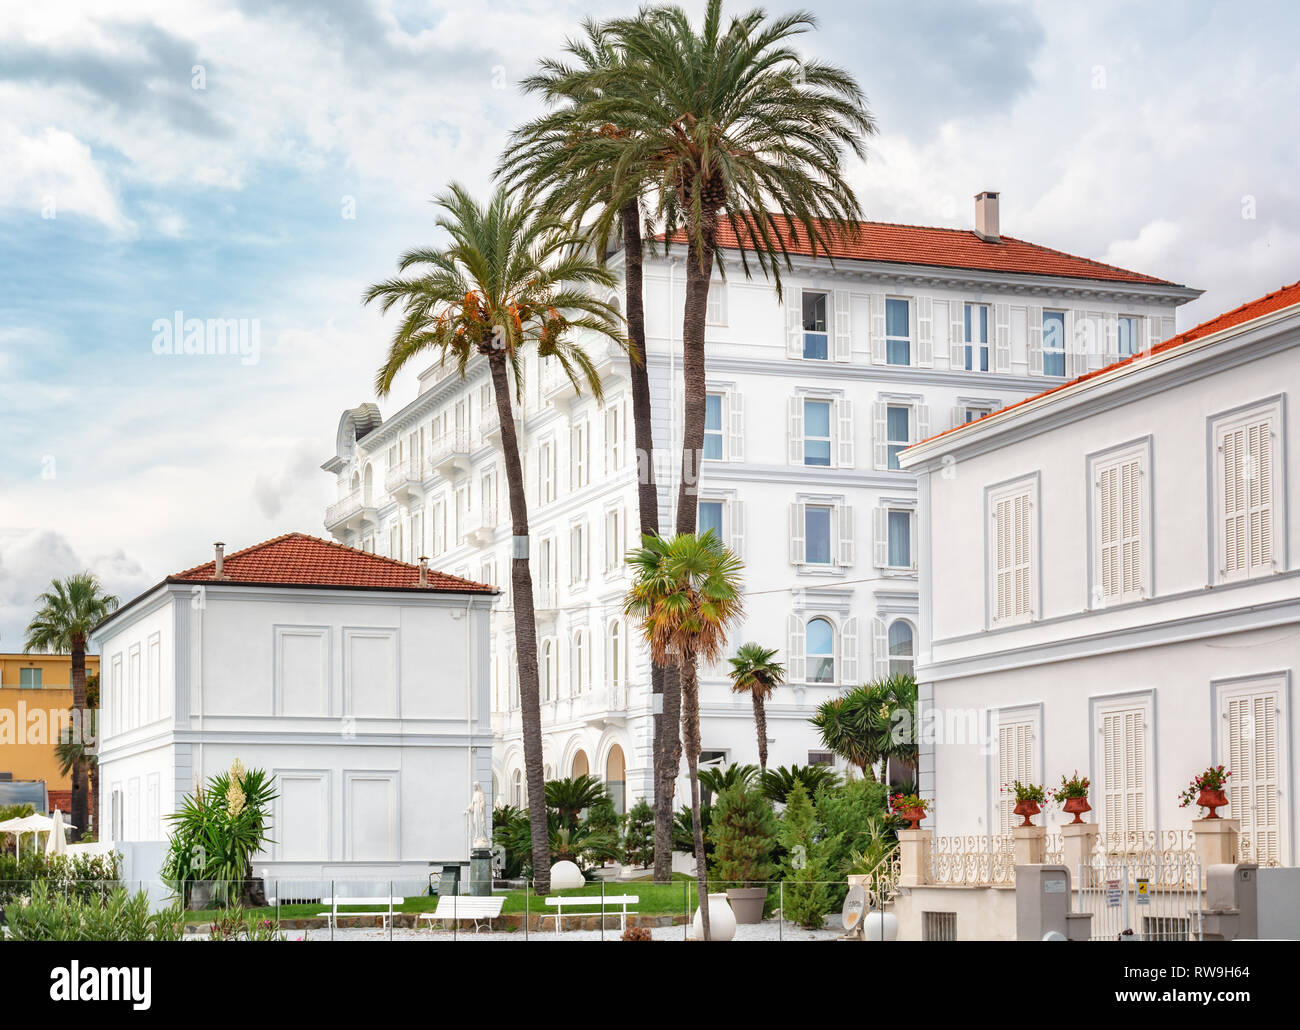 San Remo, Italy, September 18, 2018:  The beautiful white Miramare The Palace hotel in San Remo Stock Photo